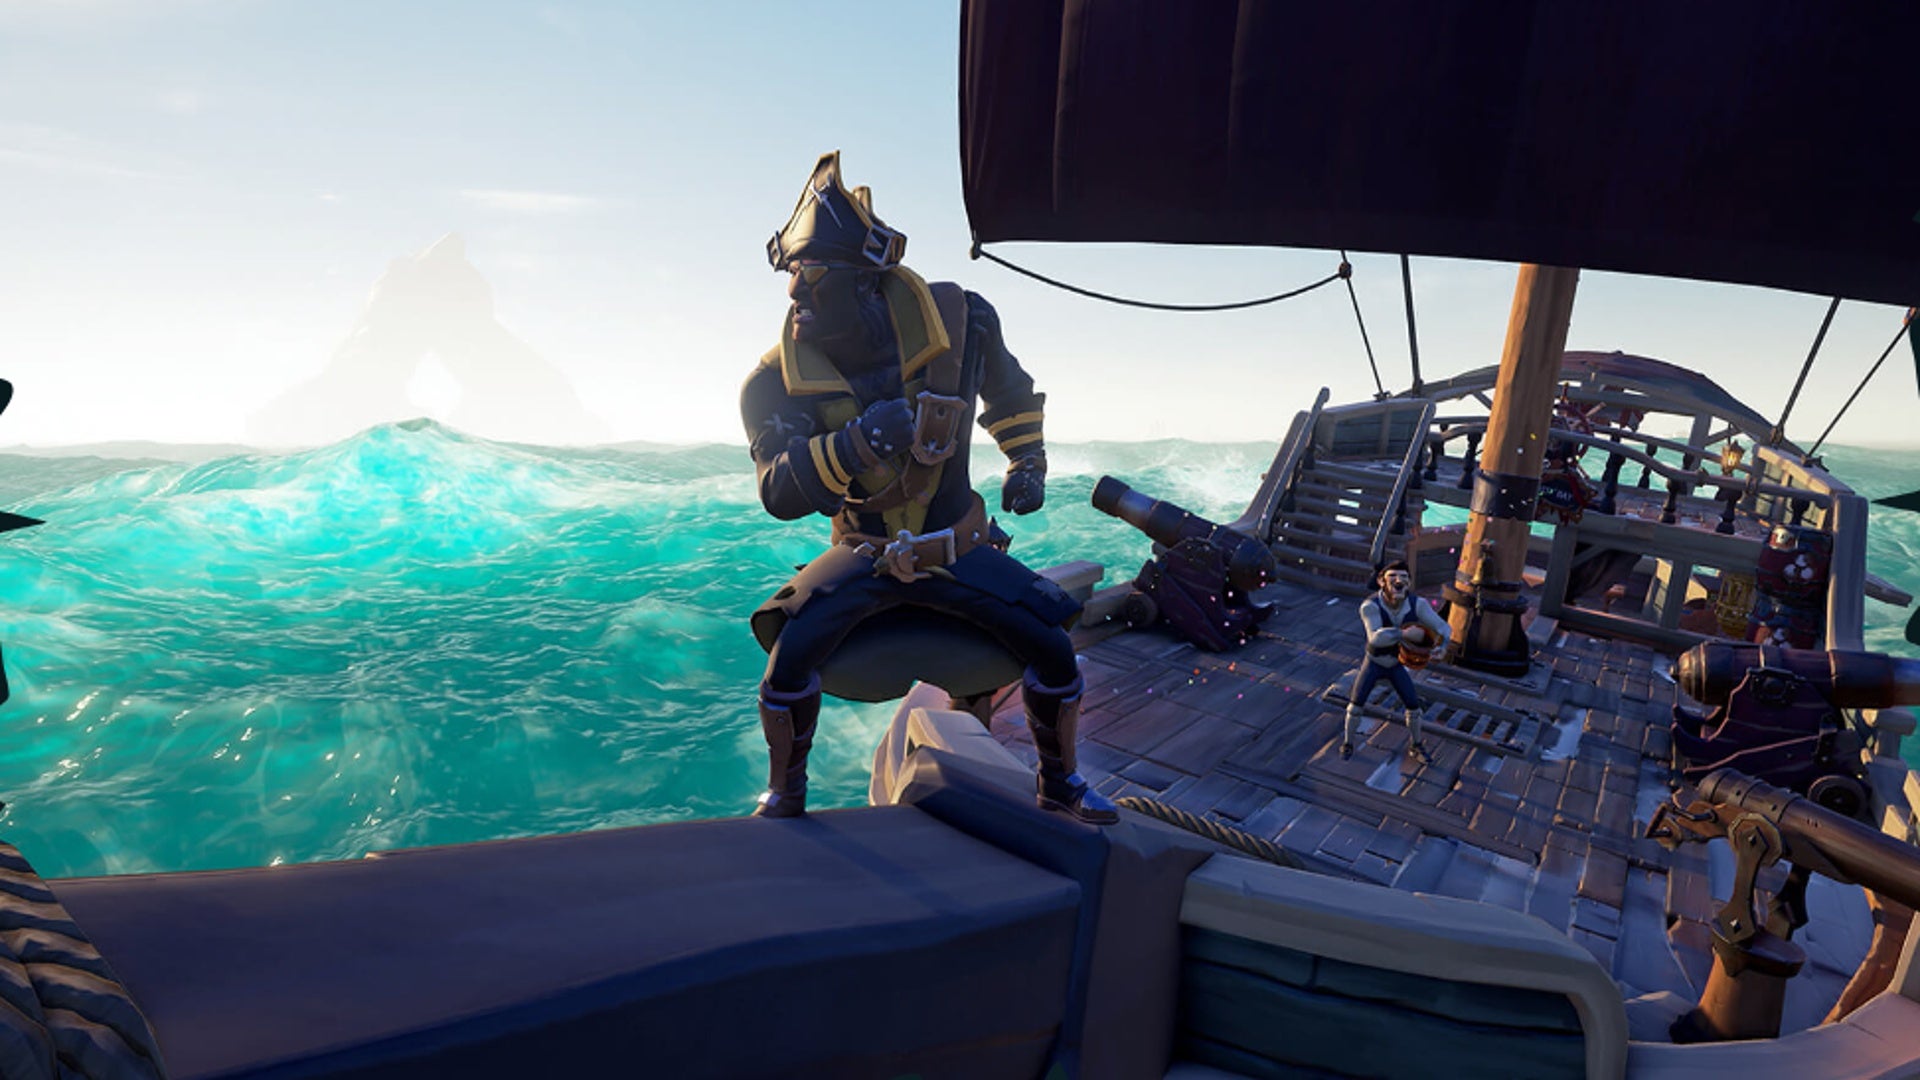 Pirate adventure Sea Of Thieves is running its Season Seven Community Day for 24 hours starting on September 17th, 2022.